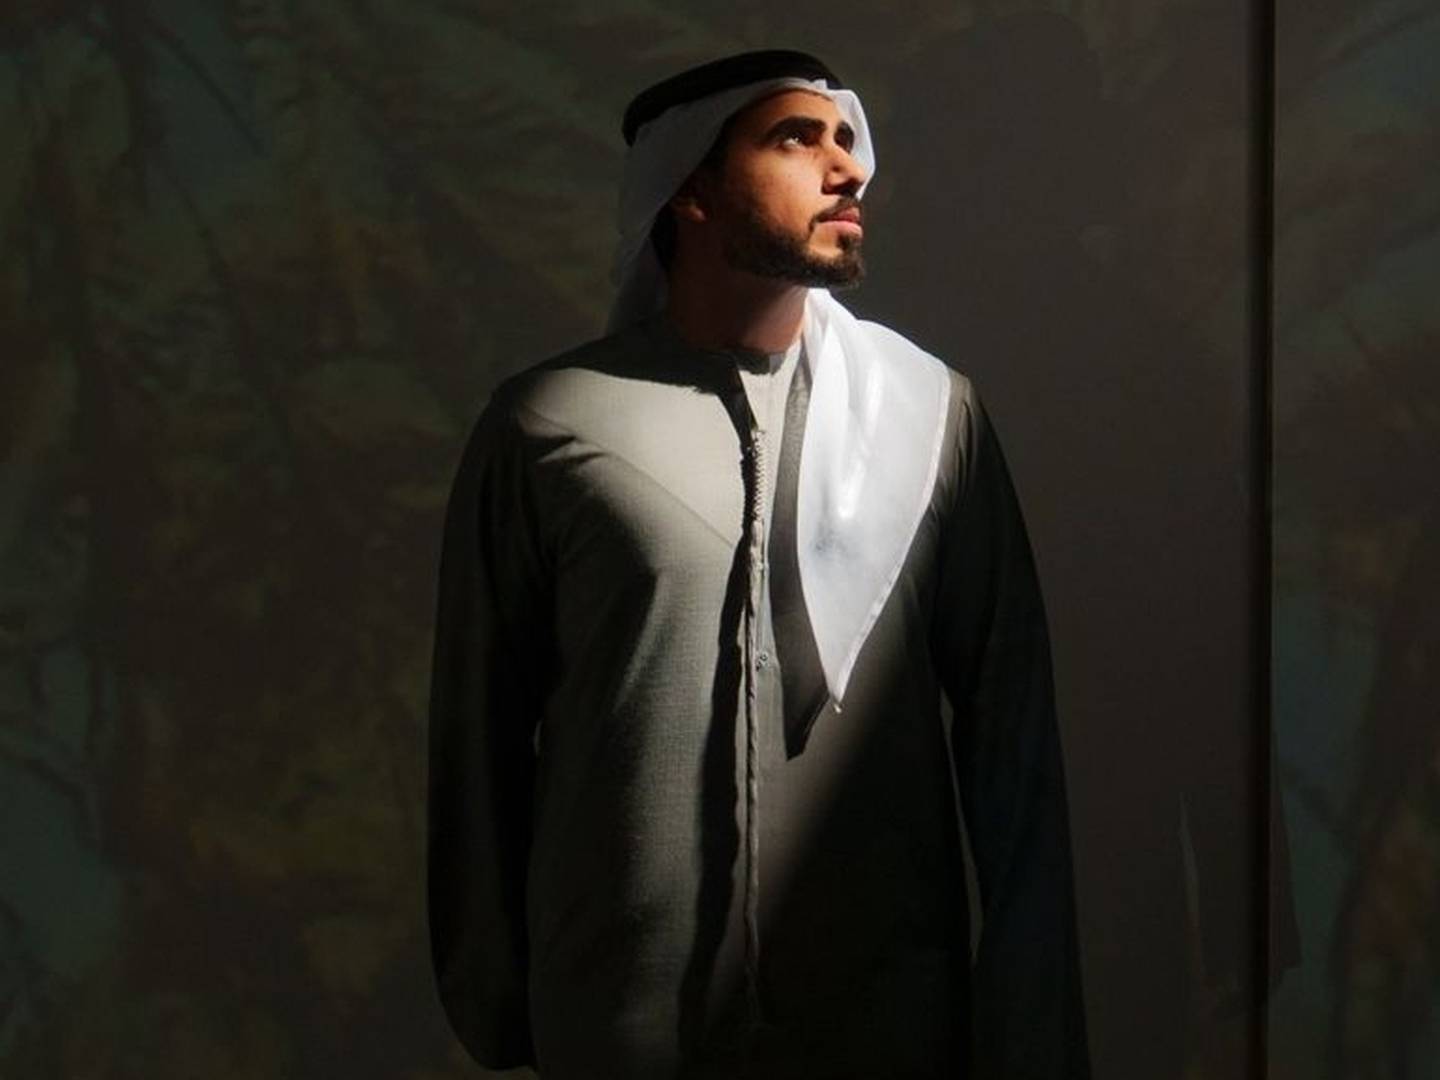 'Physiognomy, Land and Territory' by Emirati multidisciplinary artist Ahmad Al Dhaheri is available to see at Louvre Abu Dhabi until May 15. Photo: Louvre Abu Dhabi